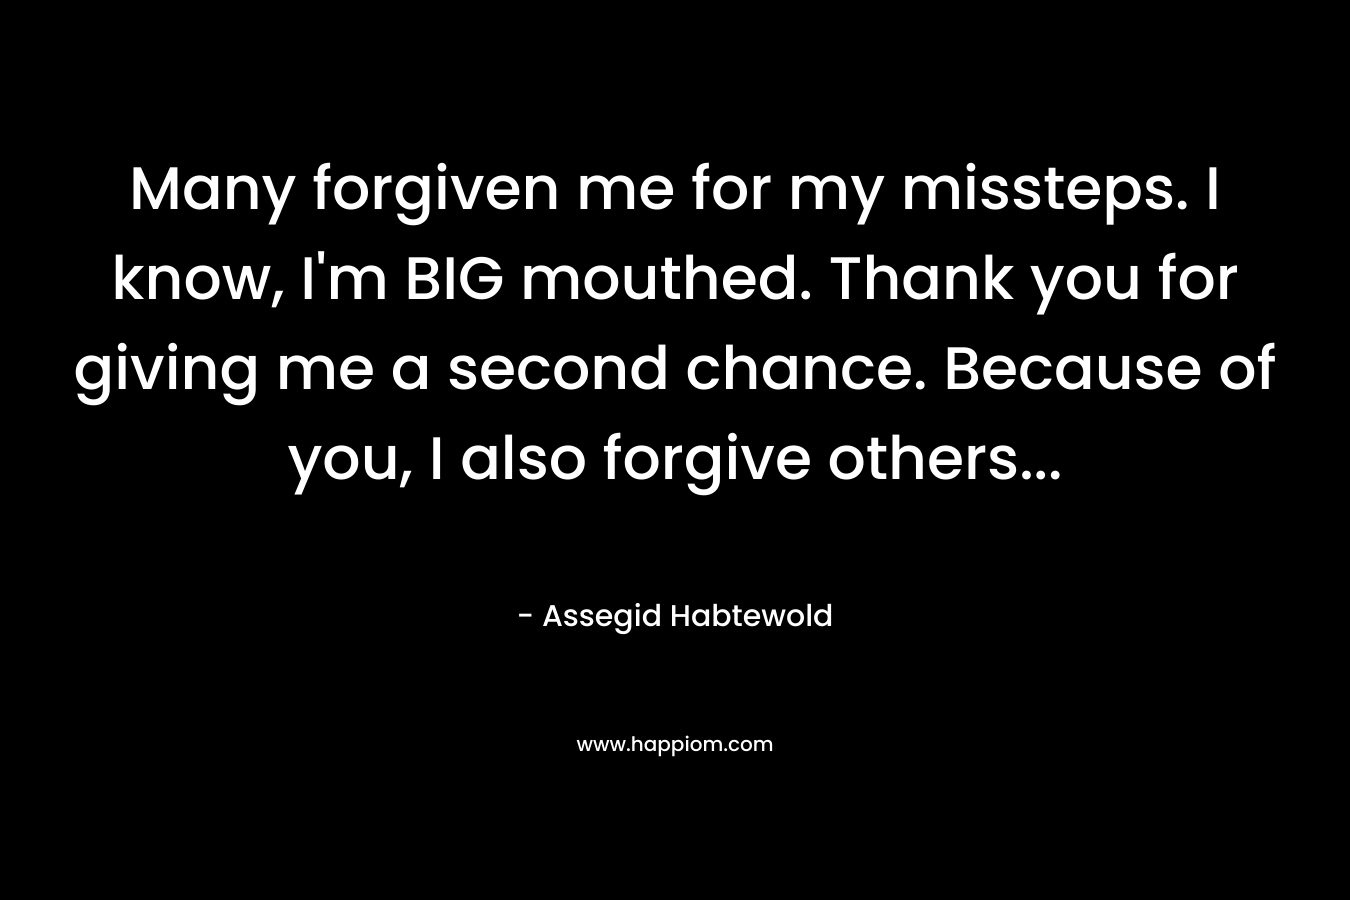 Many forgiven me for my missteps. I know, I'm BIG mouthed. Thank you for giving me a second chance. Because of you, I also forgive others...